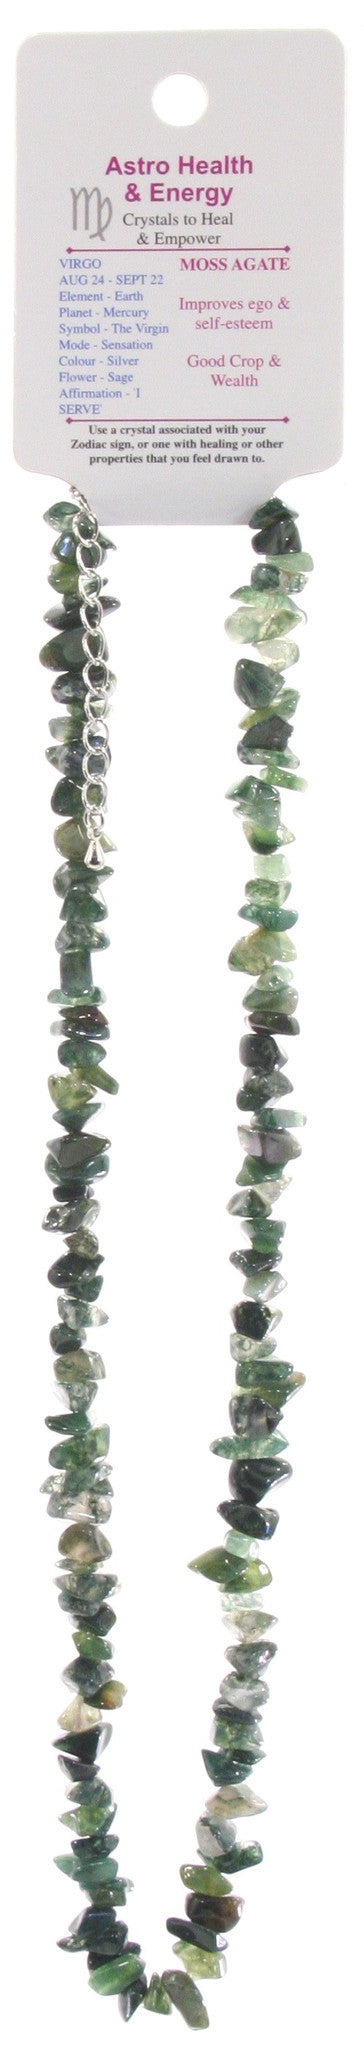 Moss Agate Crystal Chip Horoscope Necklace - Star Sign Virgo